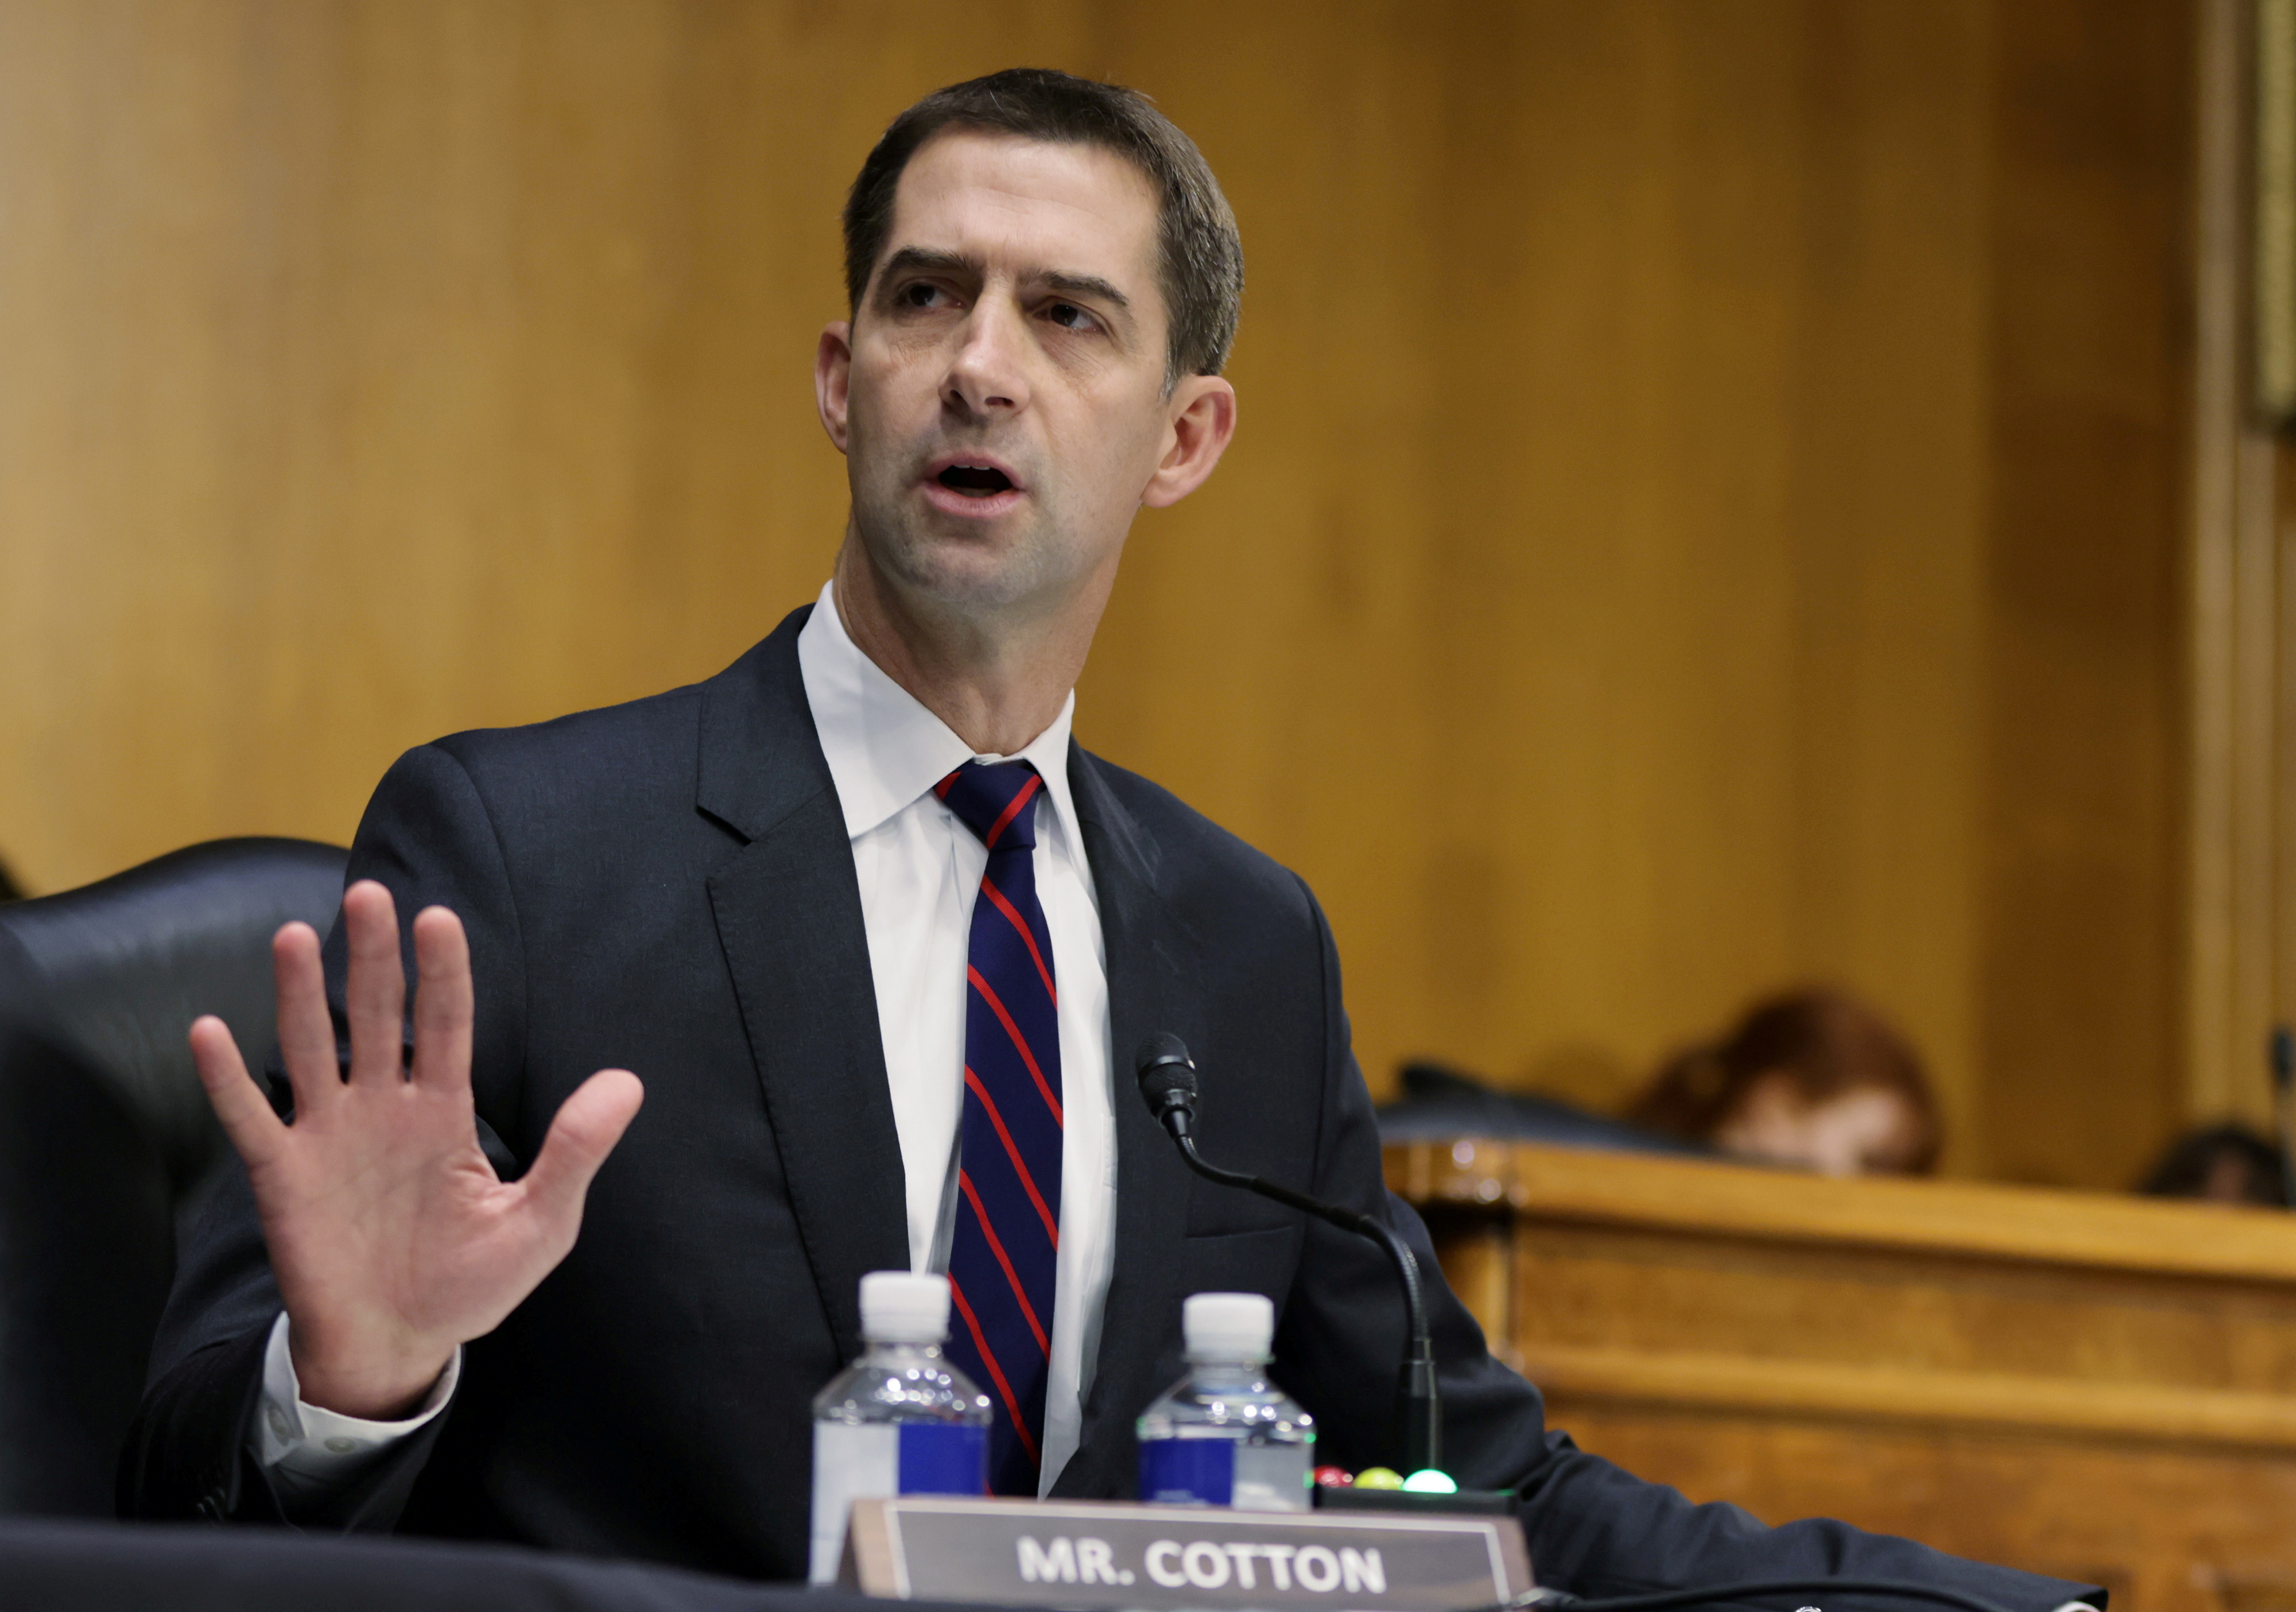 Senator Tom Cotton, R-AR, questions U.S. Attorney General Merrick Garland during a Senate Judiciary Committee hearing examining the Department of Justice on Capitol Hill in Washington